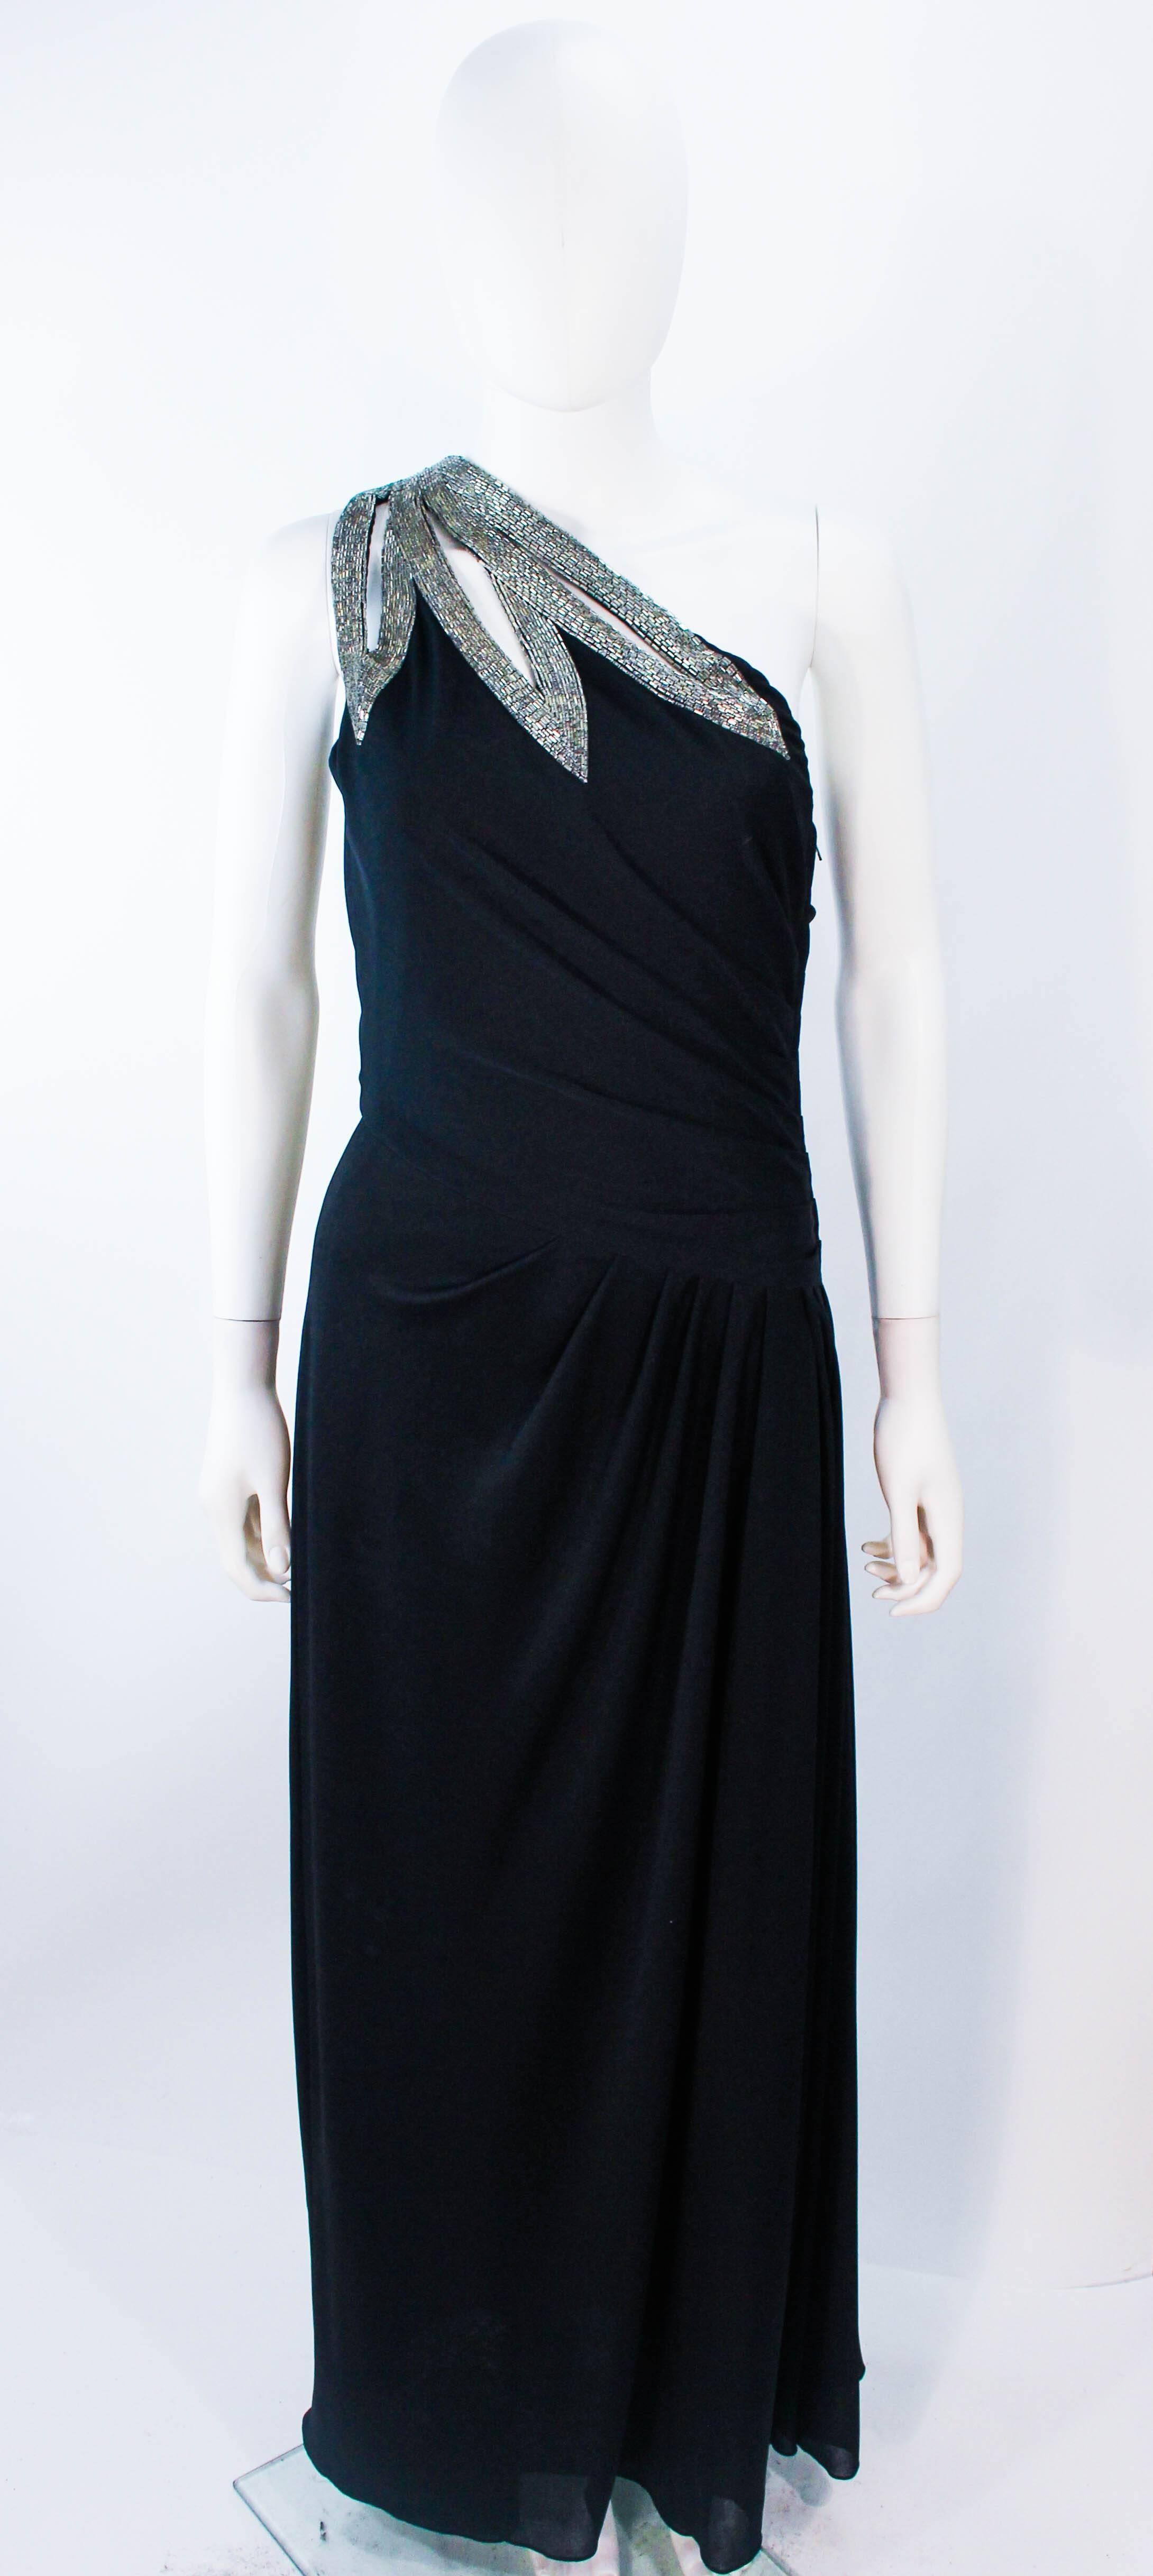 This Travilla gown is composed of a black jersey and features a stunning one shoulder style with beaded applique.  There is a draped design with rouched waist details. There is a zipper closure. Made in USA. 

**Please cross-reference measurements